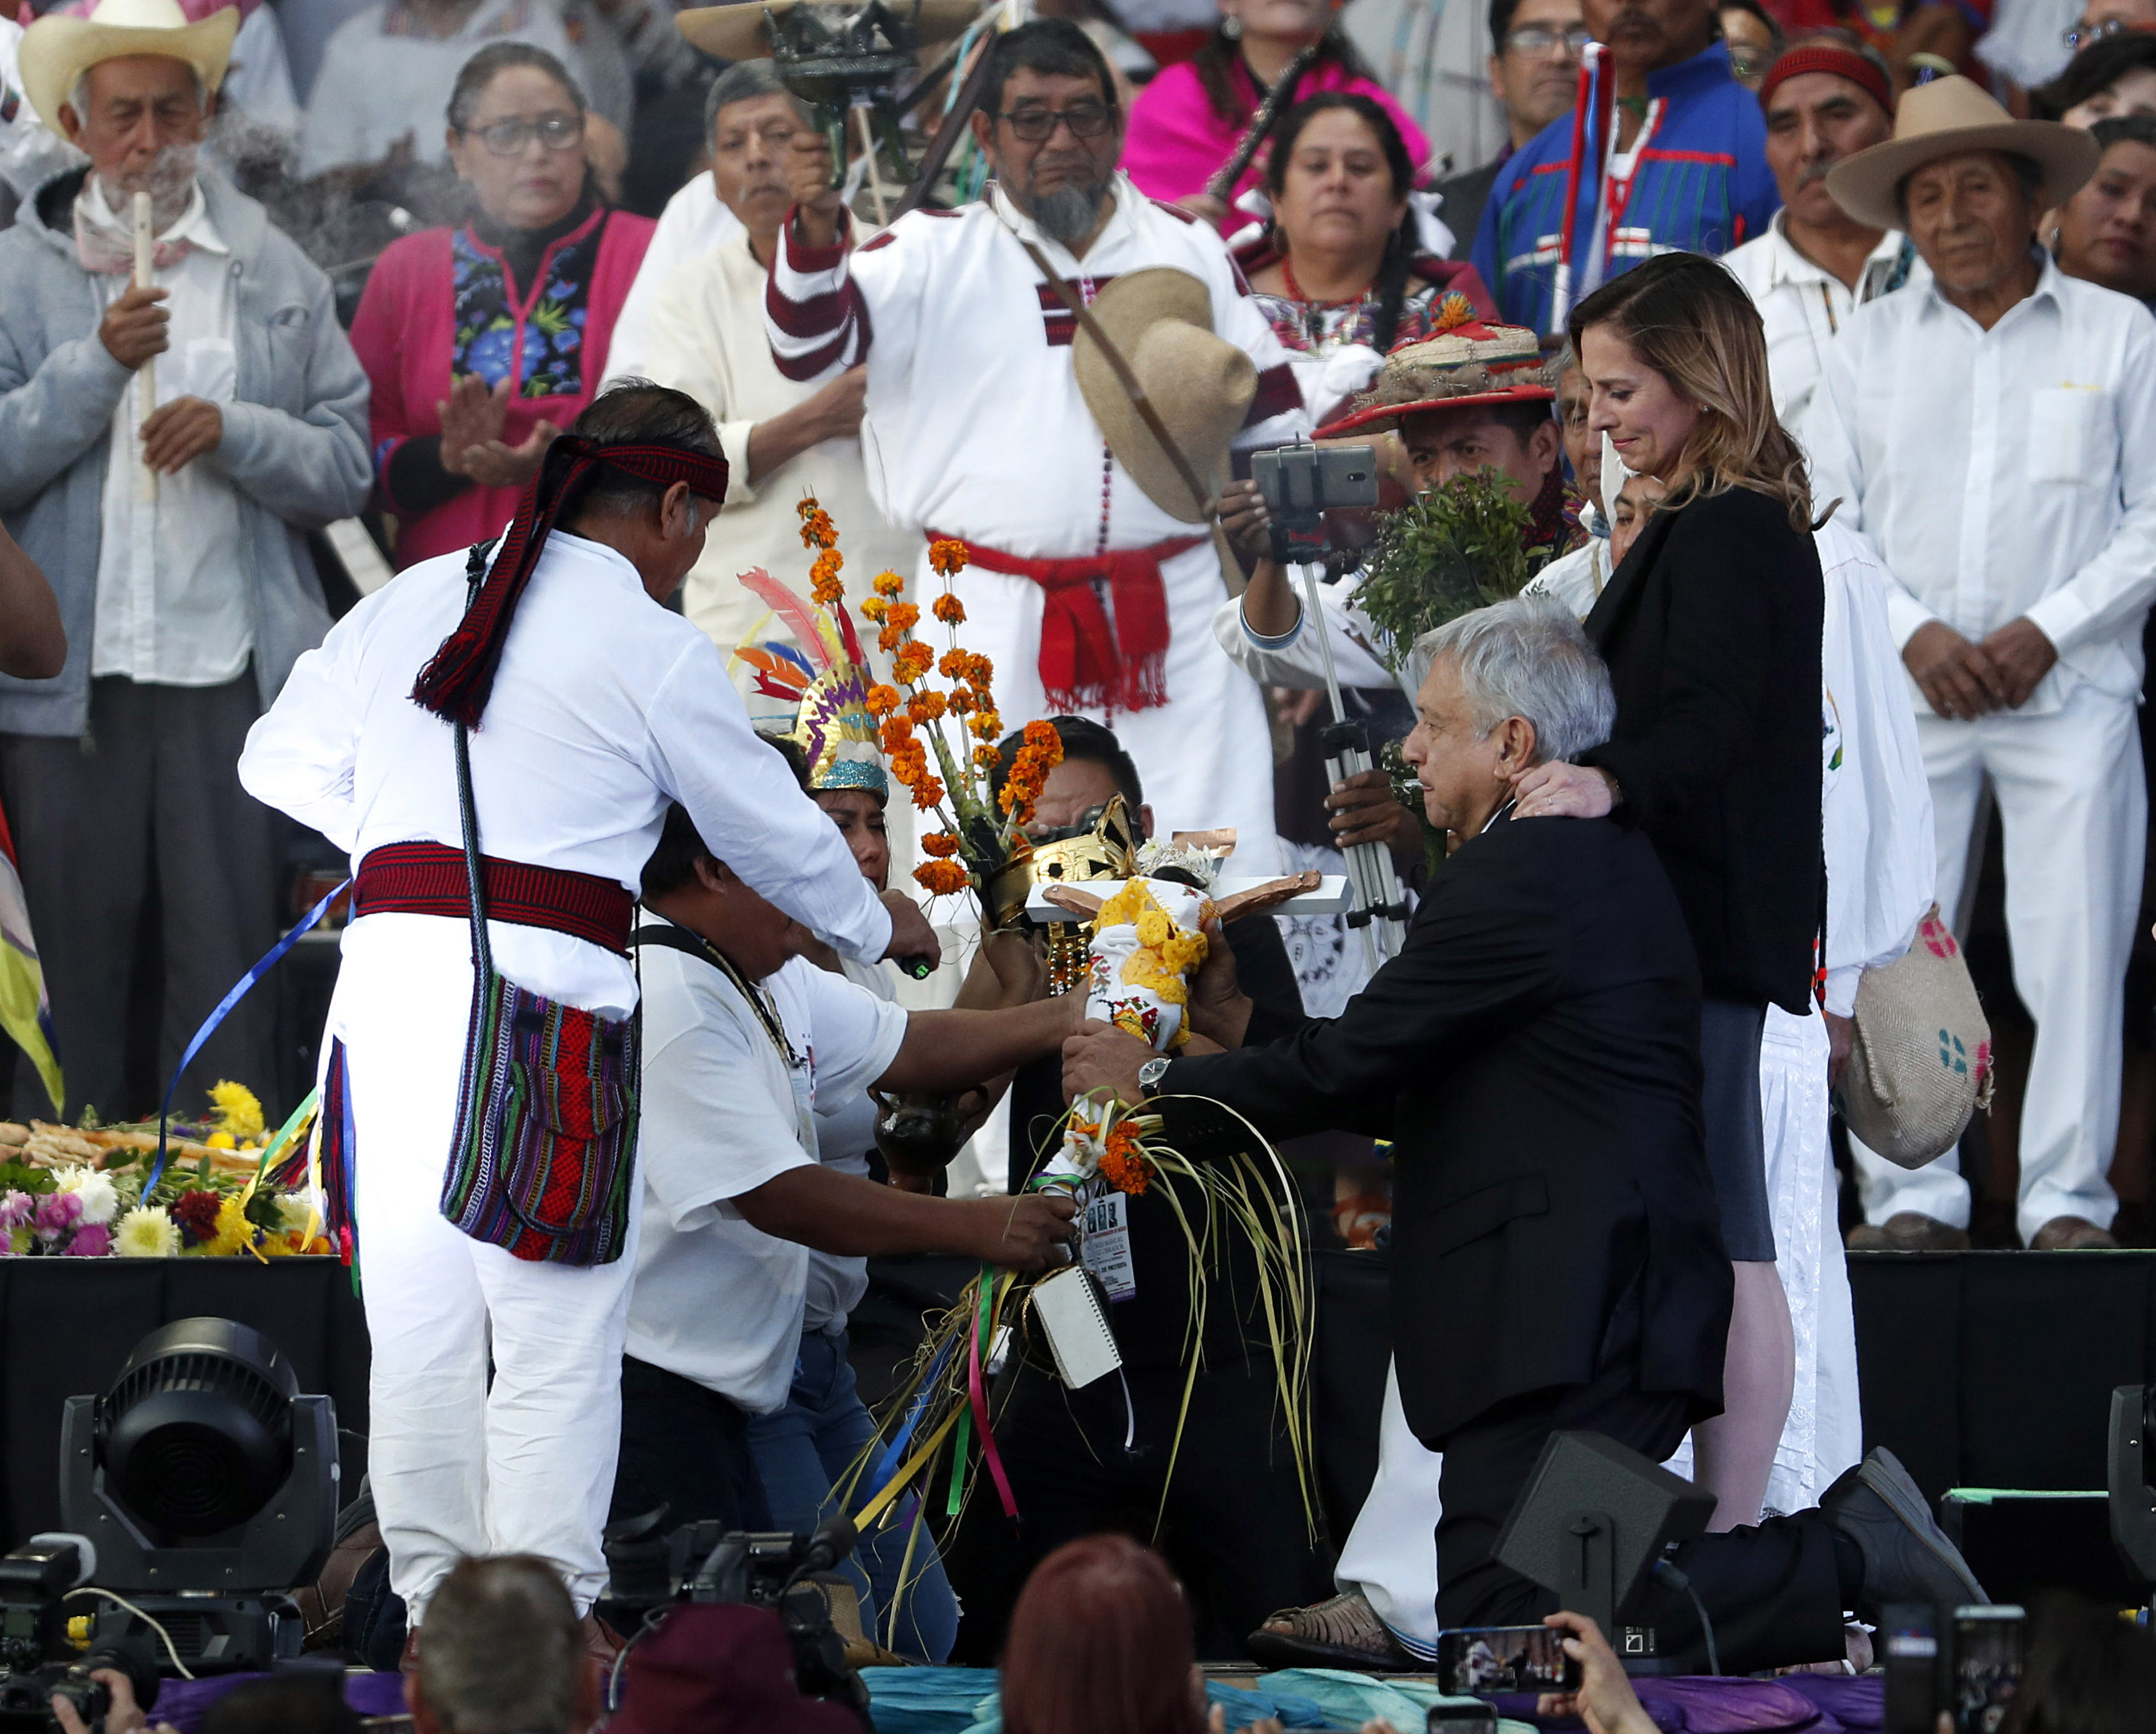 Kneeling next to his wife Beatriz Gutierrez Muller, right center, Mexico's new President Andres Manuel Lopez Obrador is given a cross during a traditional indigenous ceremony at the Zocalo, in Mexico City, Saturday, Dec. 1, 2018. Lopez Obrador was formally anointed leader by indigenous groups at the ceremony. (AP Photo/Moises Castillo)